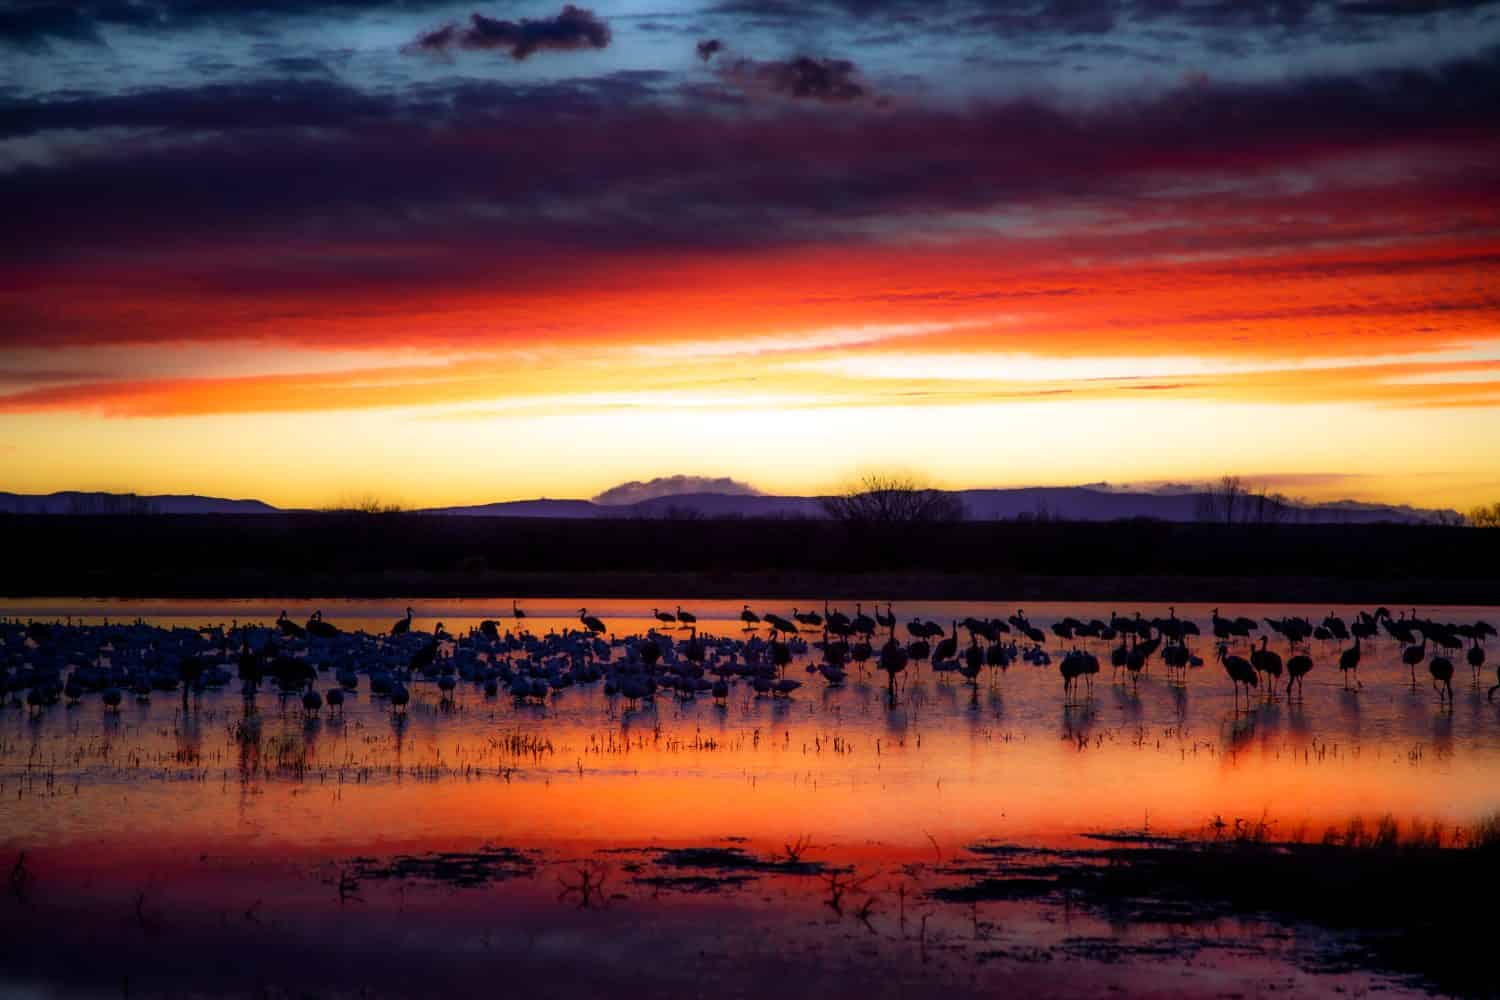 Sandhill Cranes and Snow Geese at Sunrise in Bosque del Apache Wildlife Preserve in New Mexico